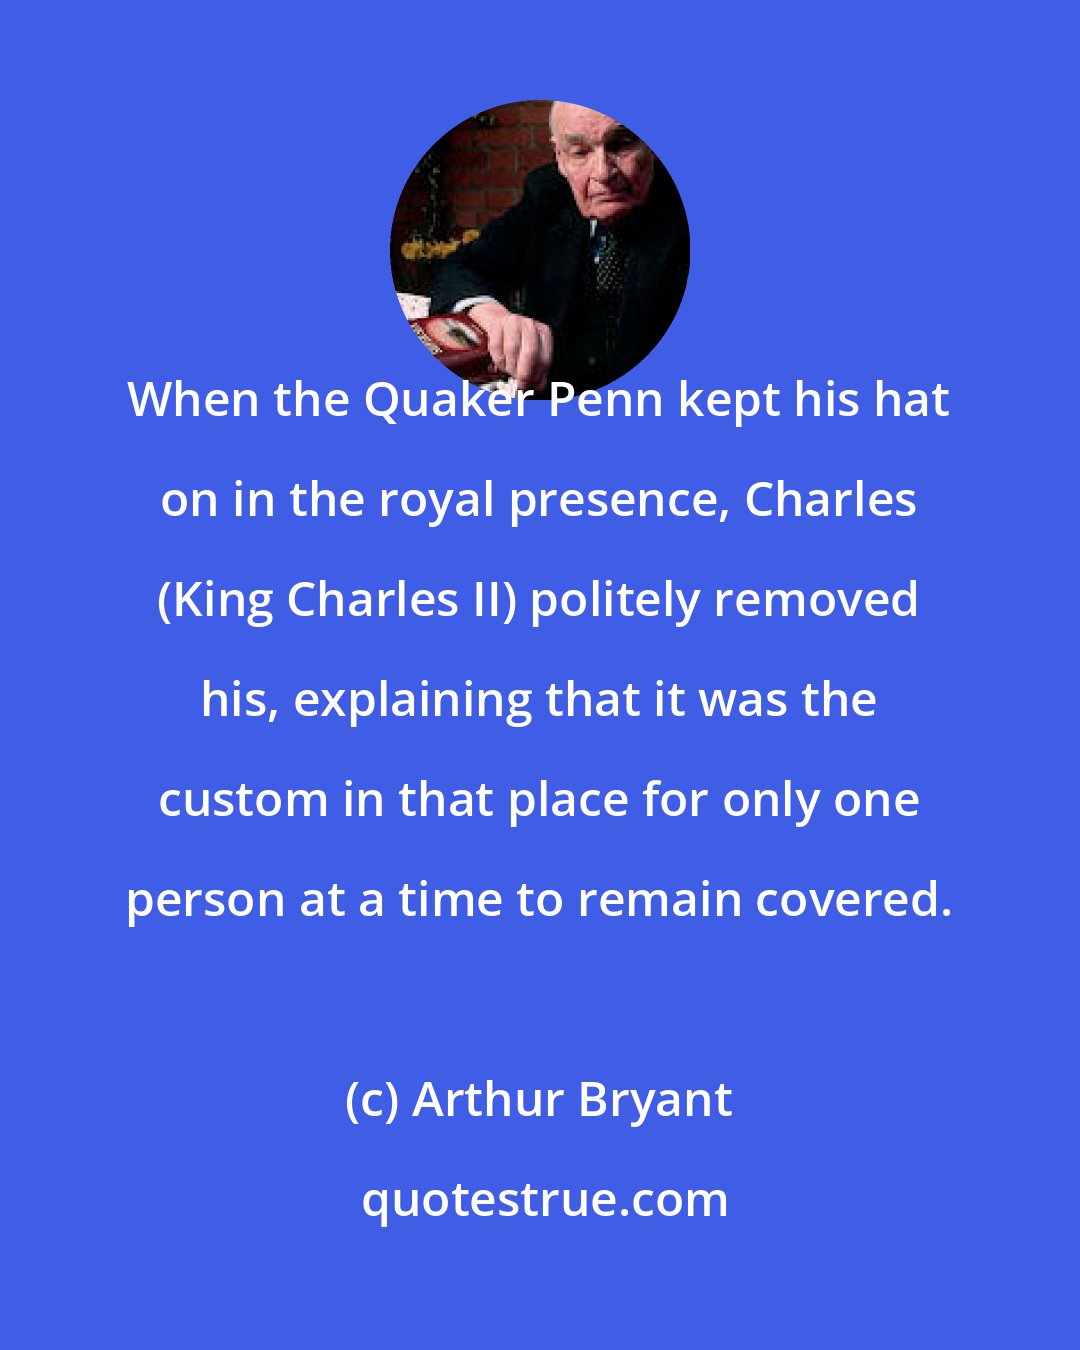 Arthur Bryant: When the Quaker Penn kept his hat on in the royal presence, Charles (King Charles II) politely removed his, explaining that it was the custom in that place for only one person at a time to remain covered.